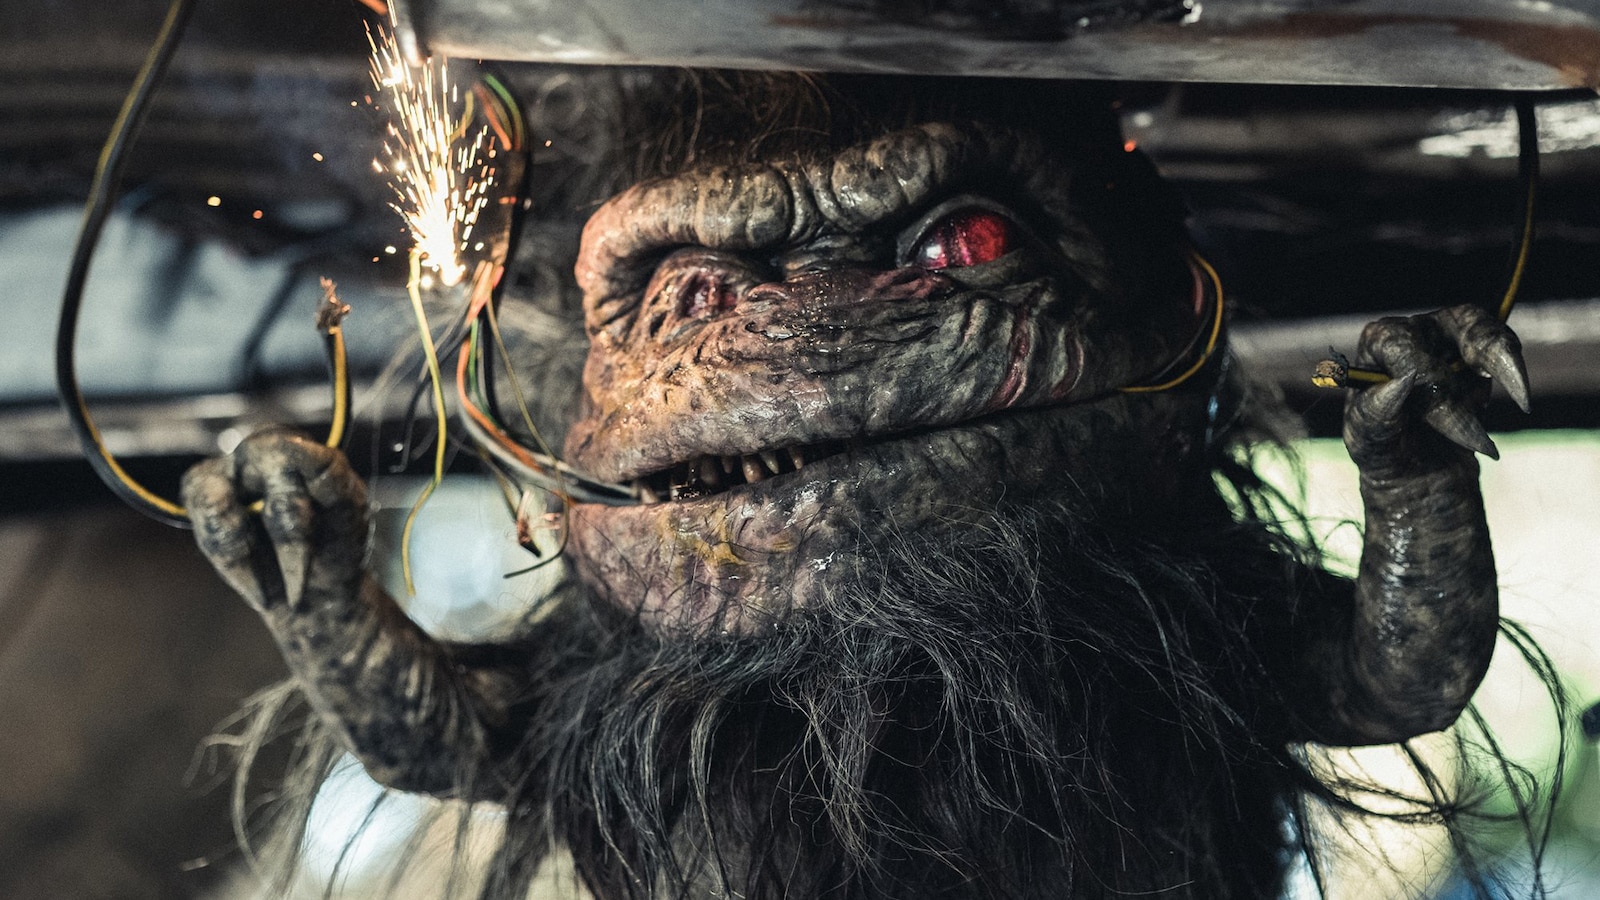 critters-attack-2019